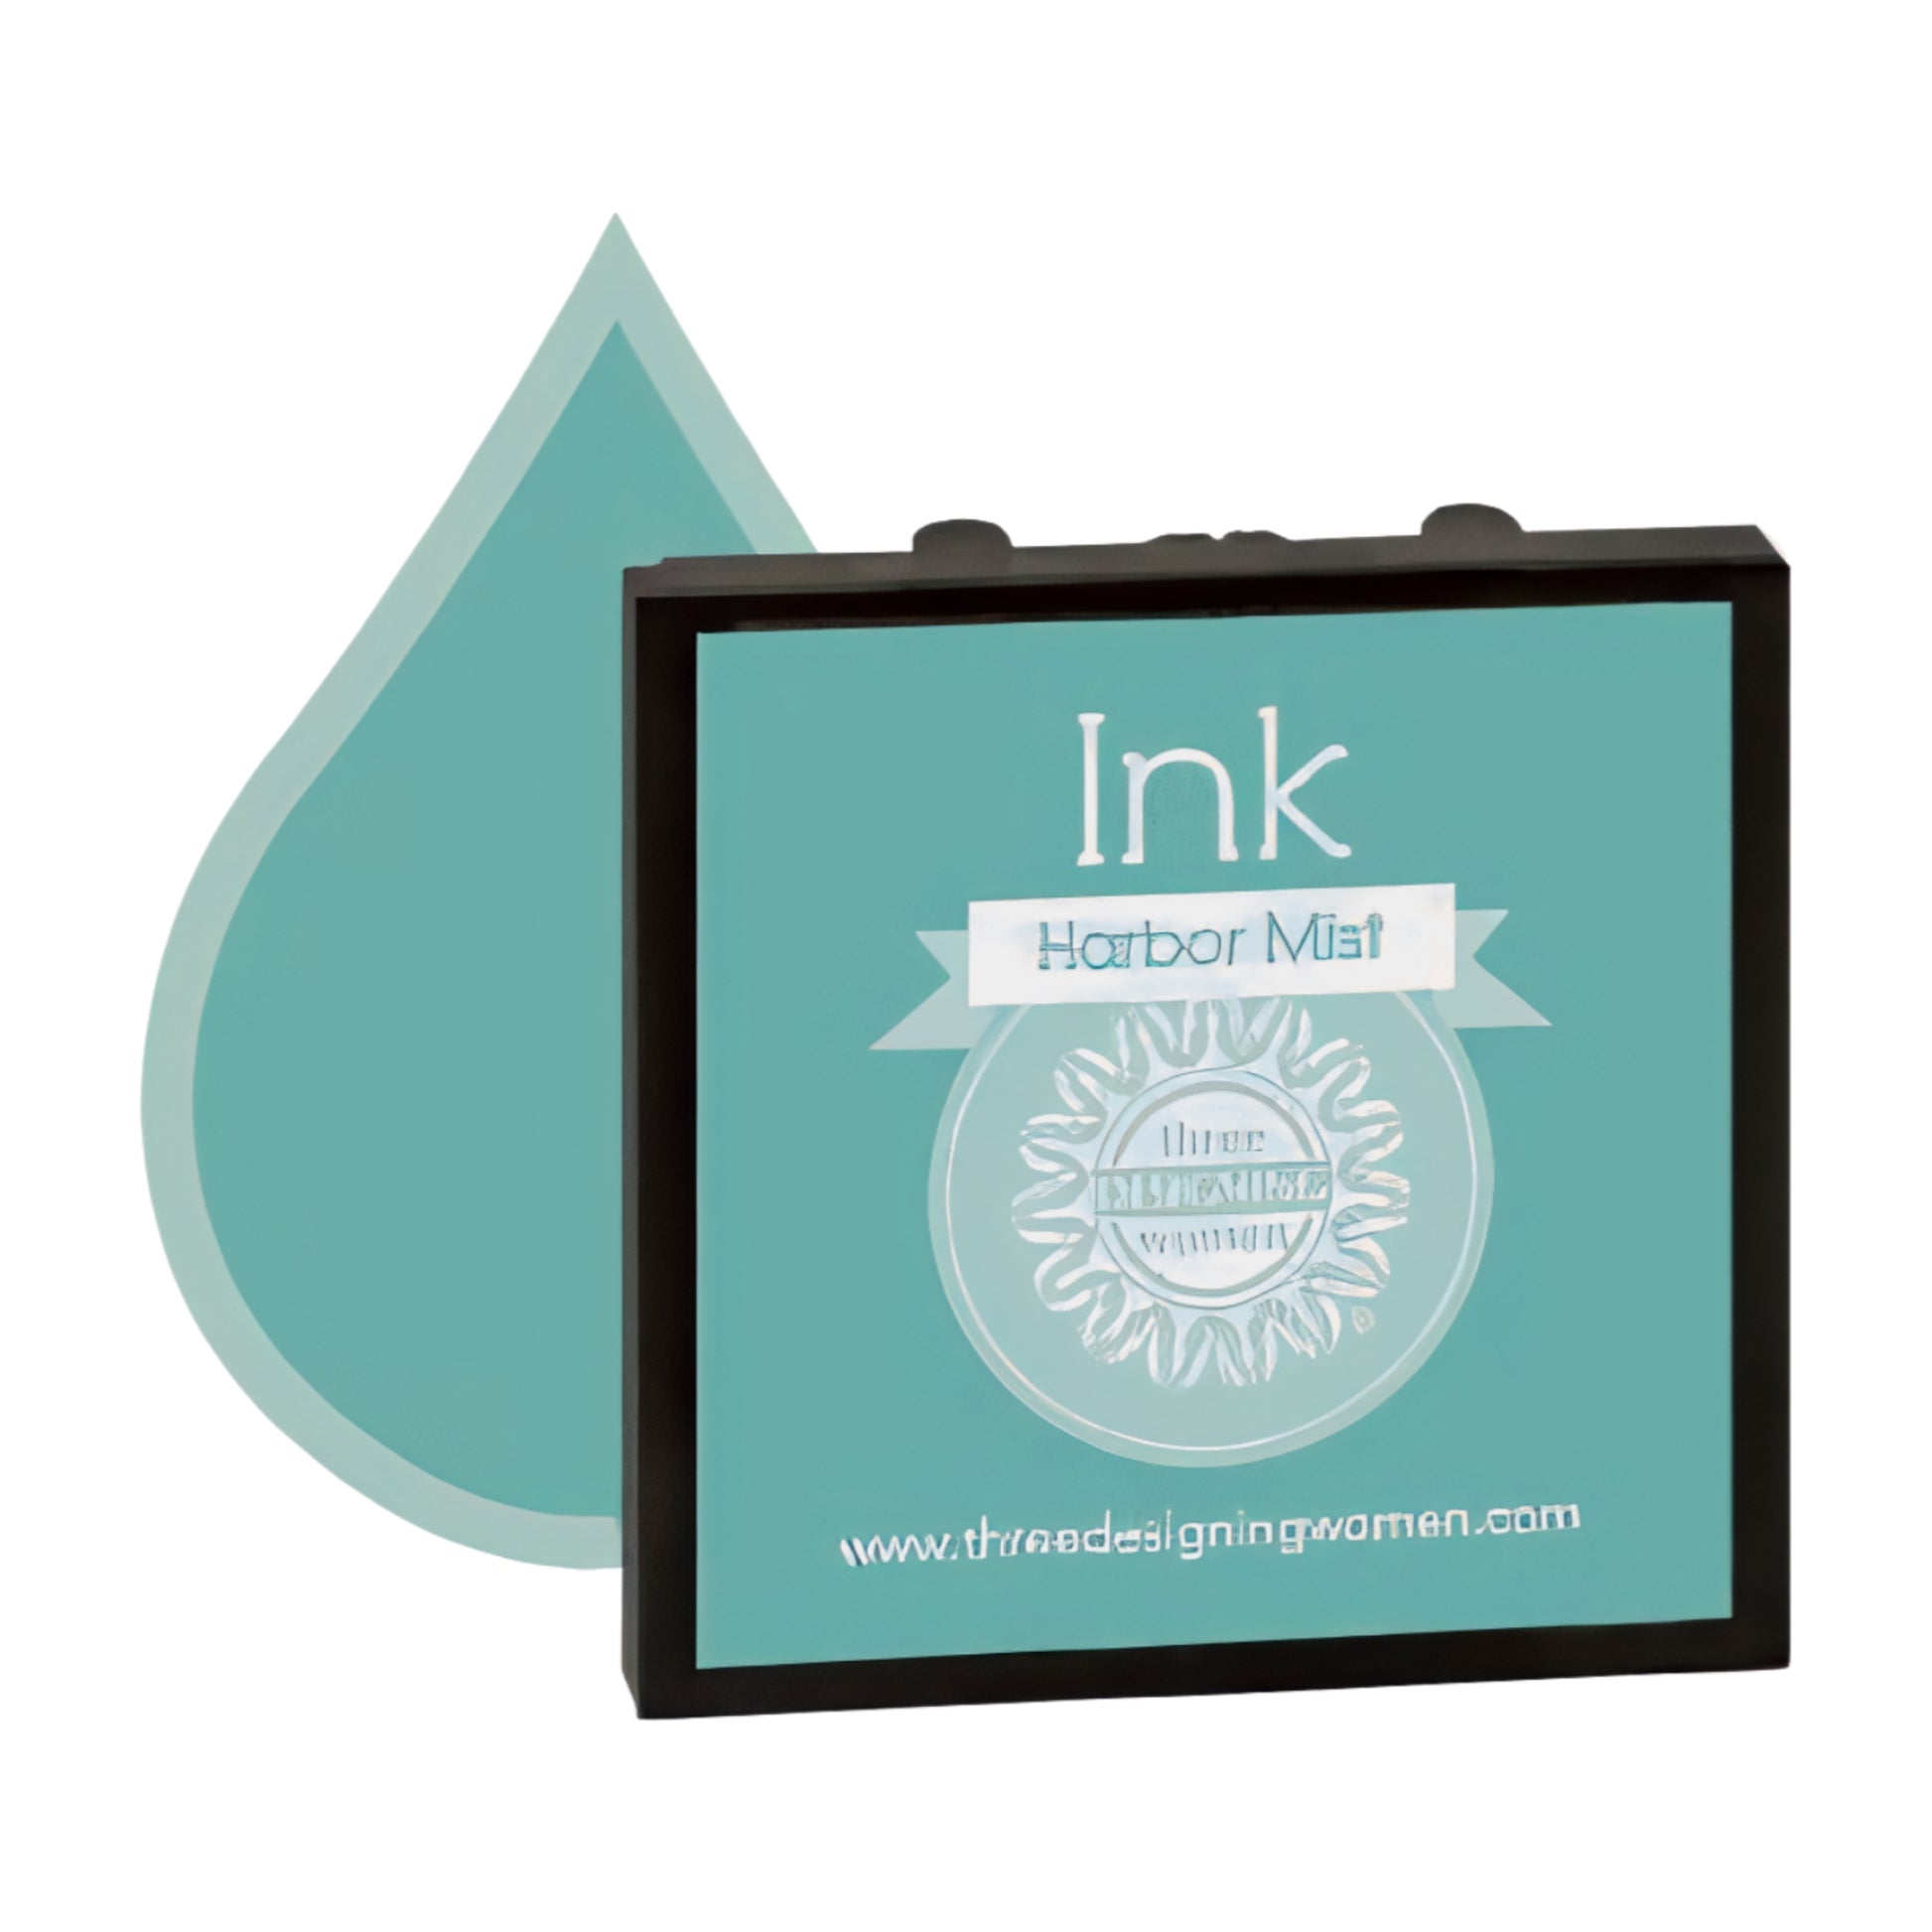 Ink Replacement Cartridge "Harbor Mist" for Self-Inking Stampers Three Designing Women